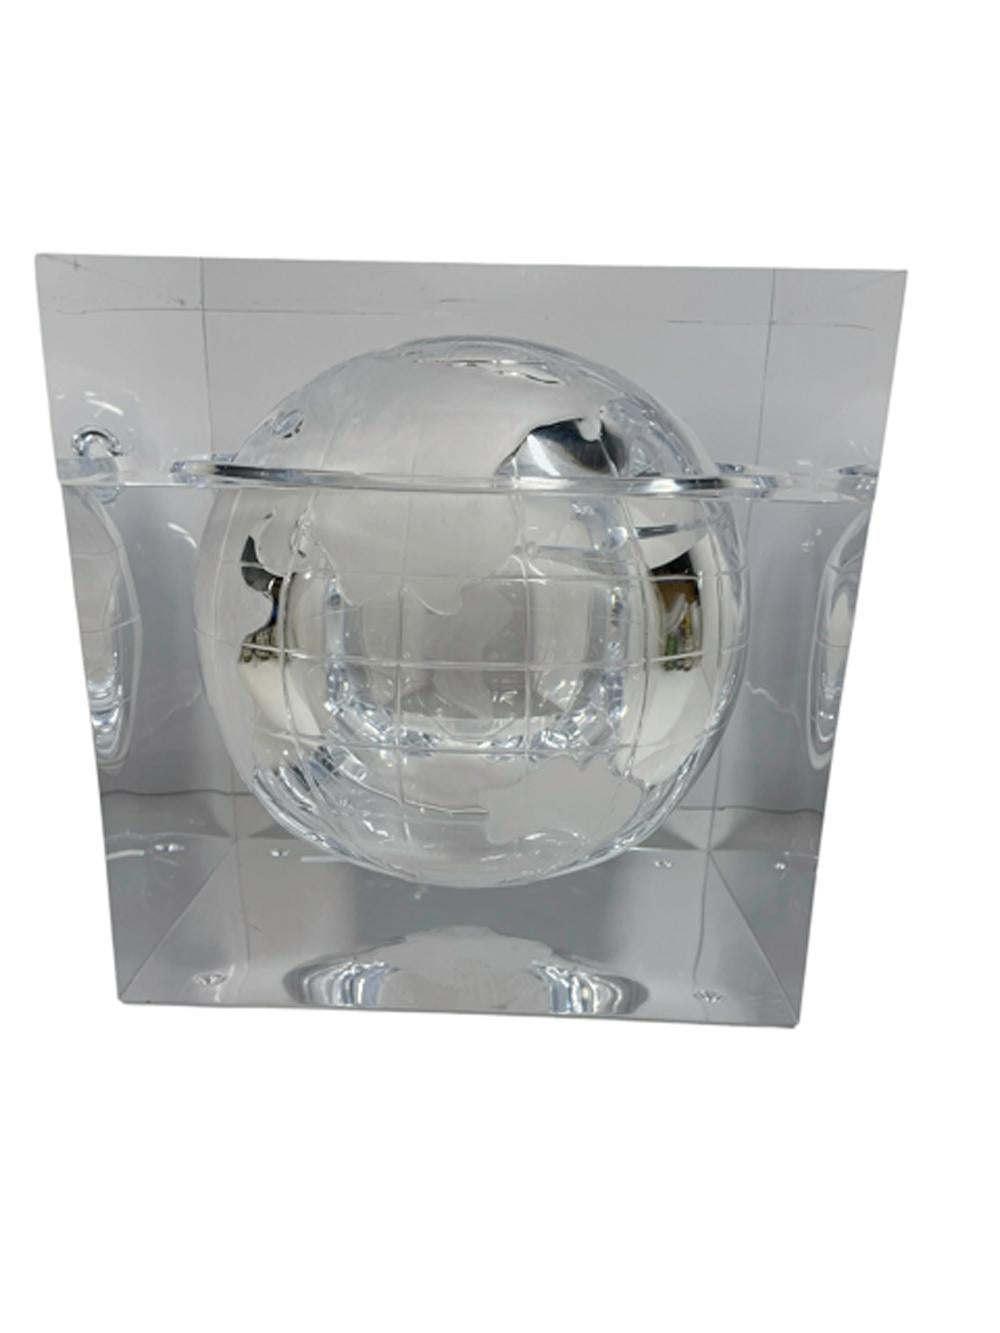 Mid-Century Modern Lucite ice bucket. Designed by Alessandro Albrizzi, designer to the Jet Set of the 1960s through early 1980s, the world globe within a Lucite cube is a design classic. The cube with lift-off lid has a spherical cavity etched with